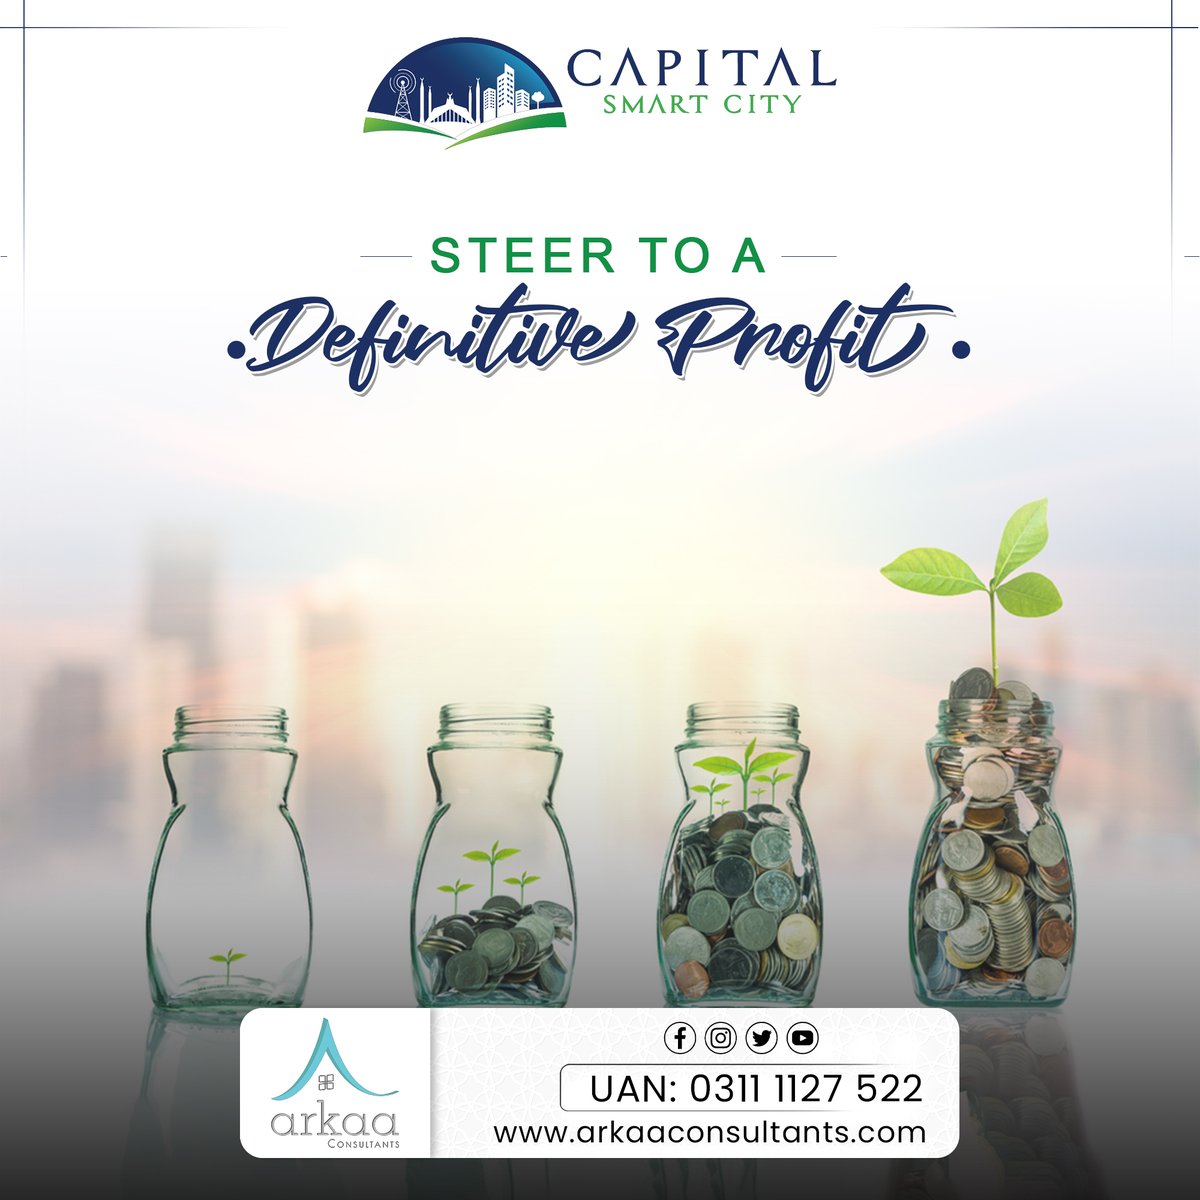 Unlock the Potential of Smart Real Estate Investment with Capital Smart City.

#capitalsmartcity #arkaaconsultants #smartinterchange #SmartCities #CSC #experiencethedifference #csc #islamabad  #CapitalSmartCityIslamabad #CapitalGain #PropertyGain #SmartDecisions #DreamHome